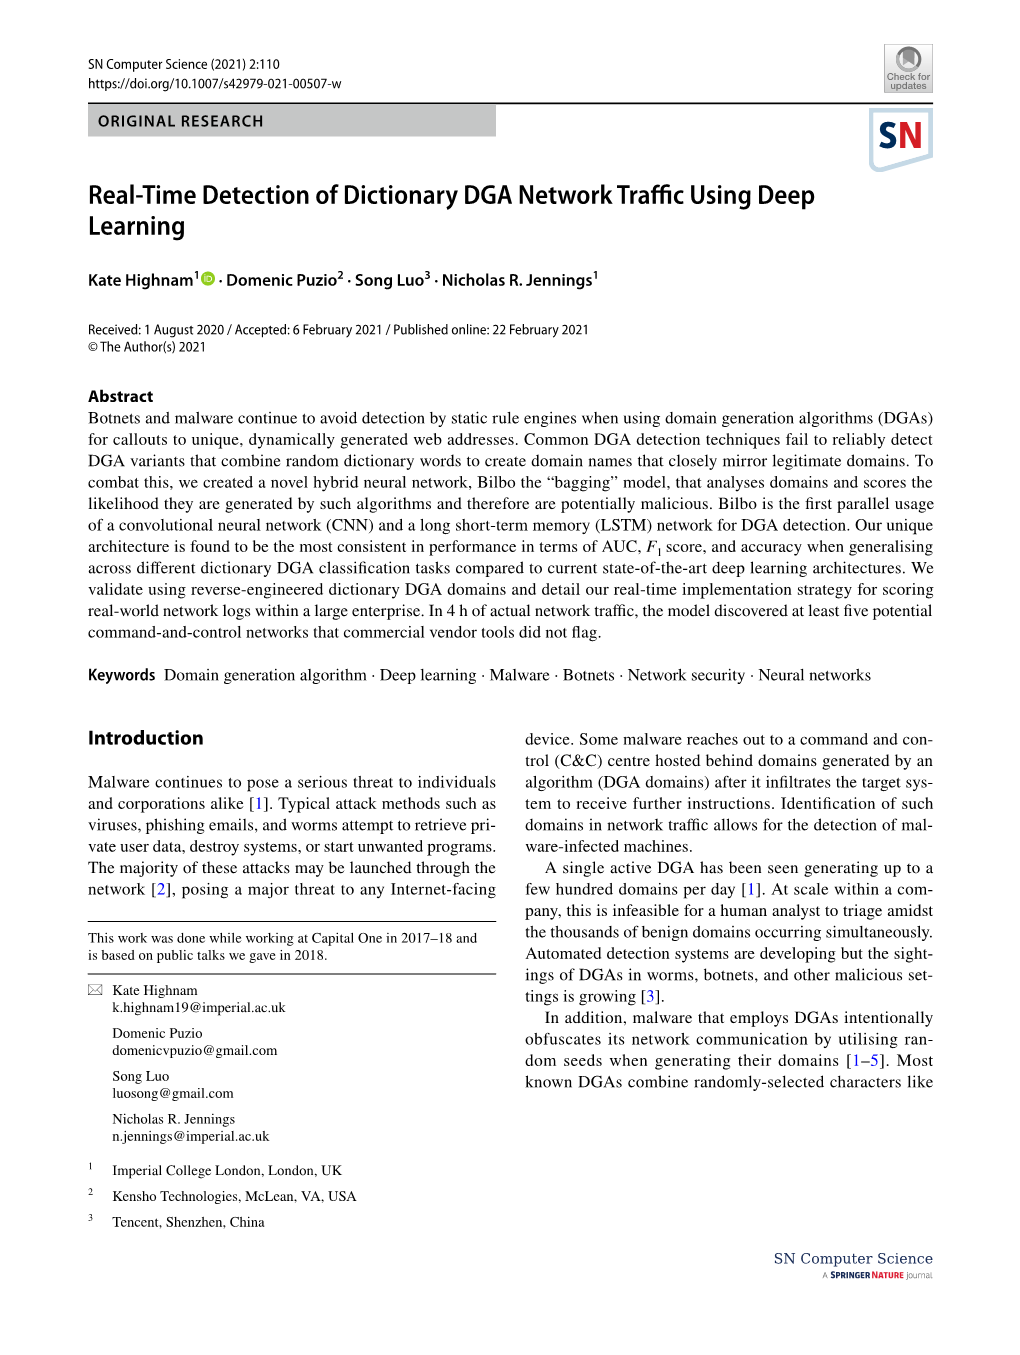 Real-Time Detection of Dictionary DGA Network Traffic Using Deep